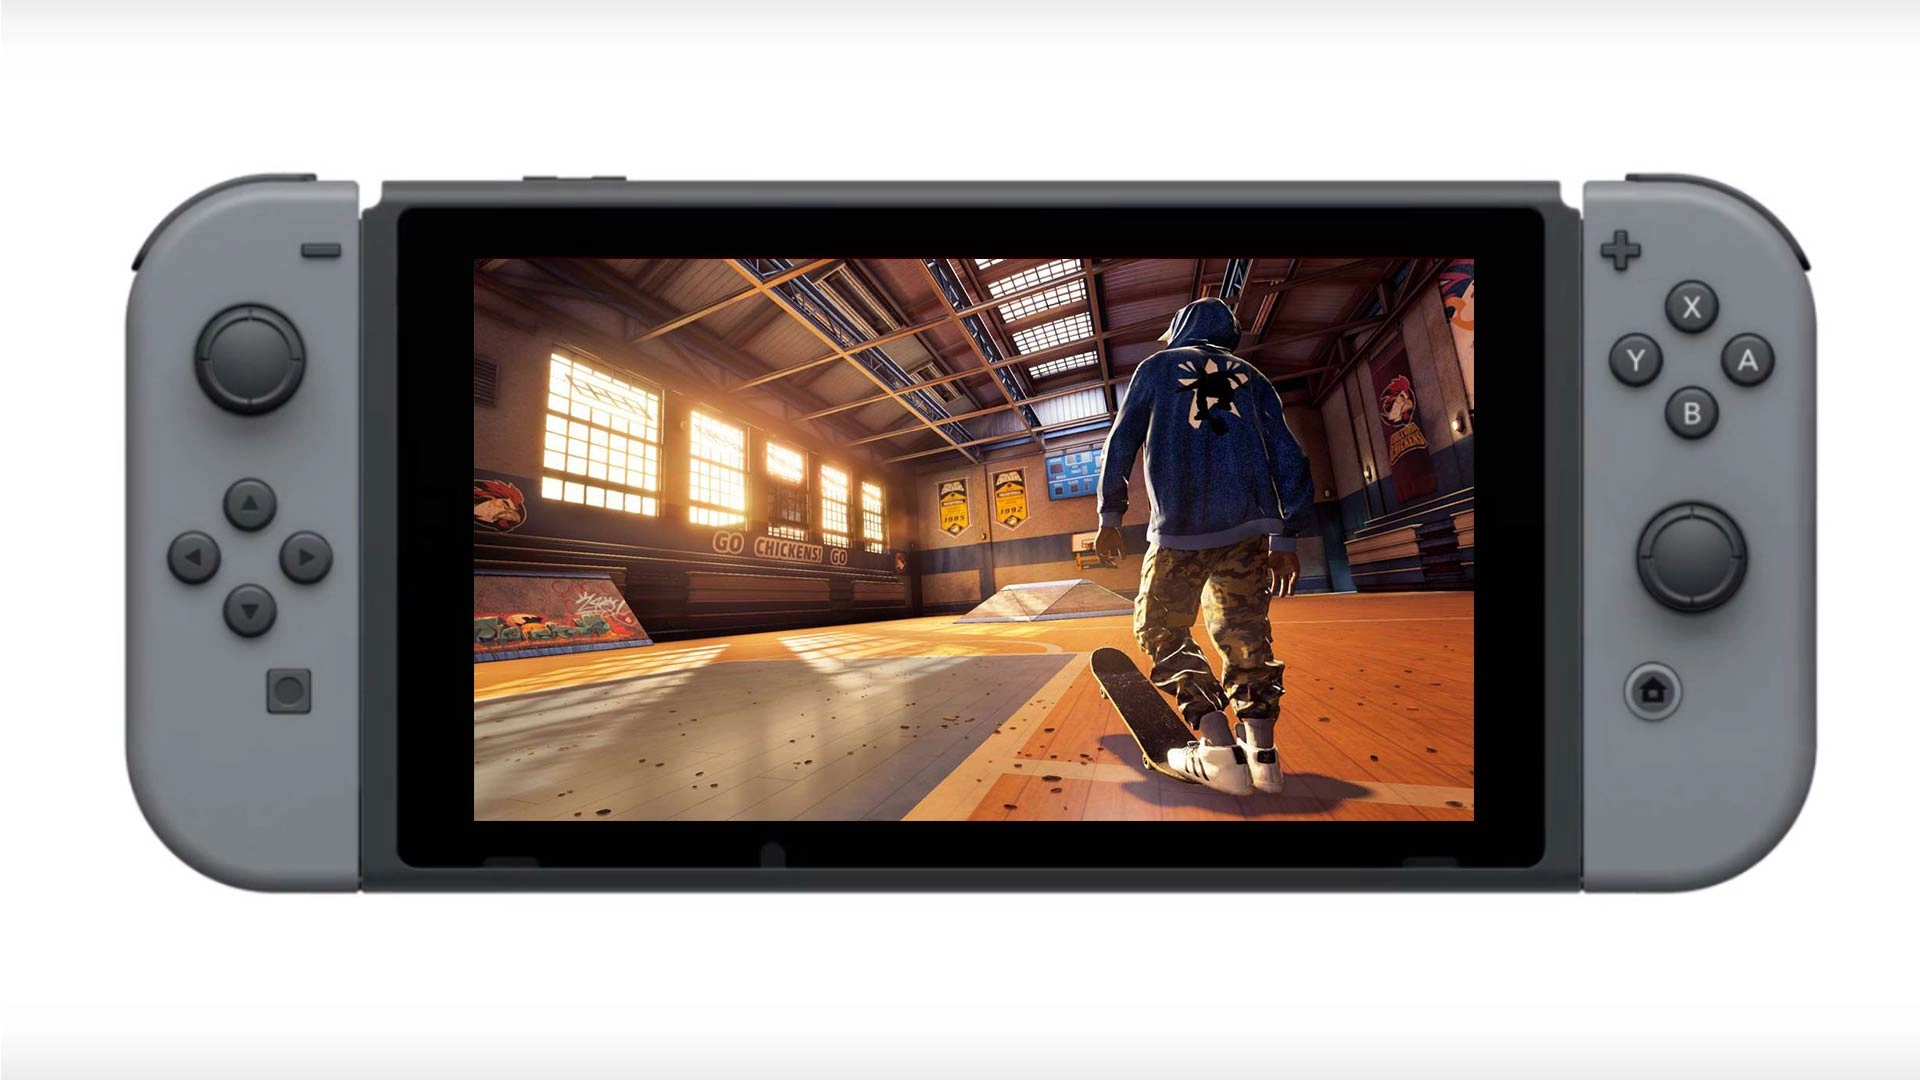 Tony Hawk's Pro Skater 1 and 2 lands on Nintendo Switch